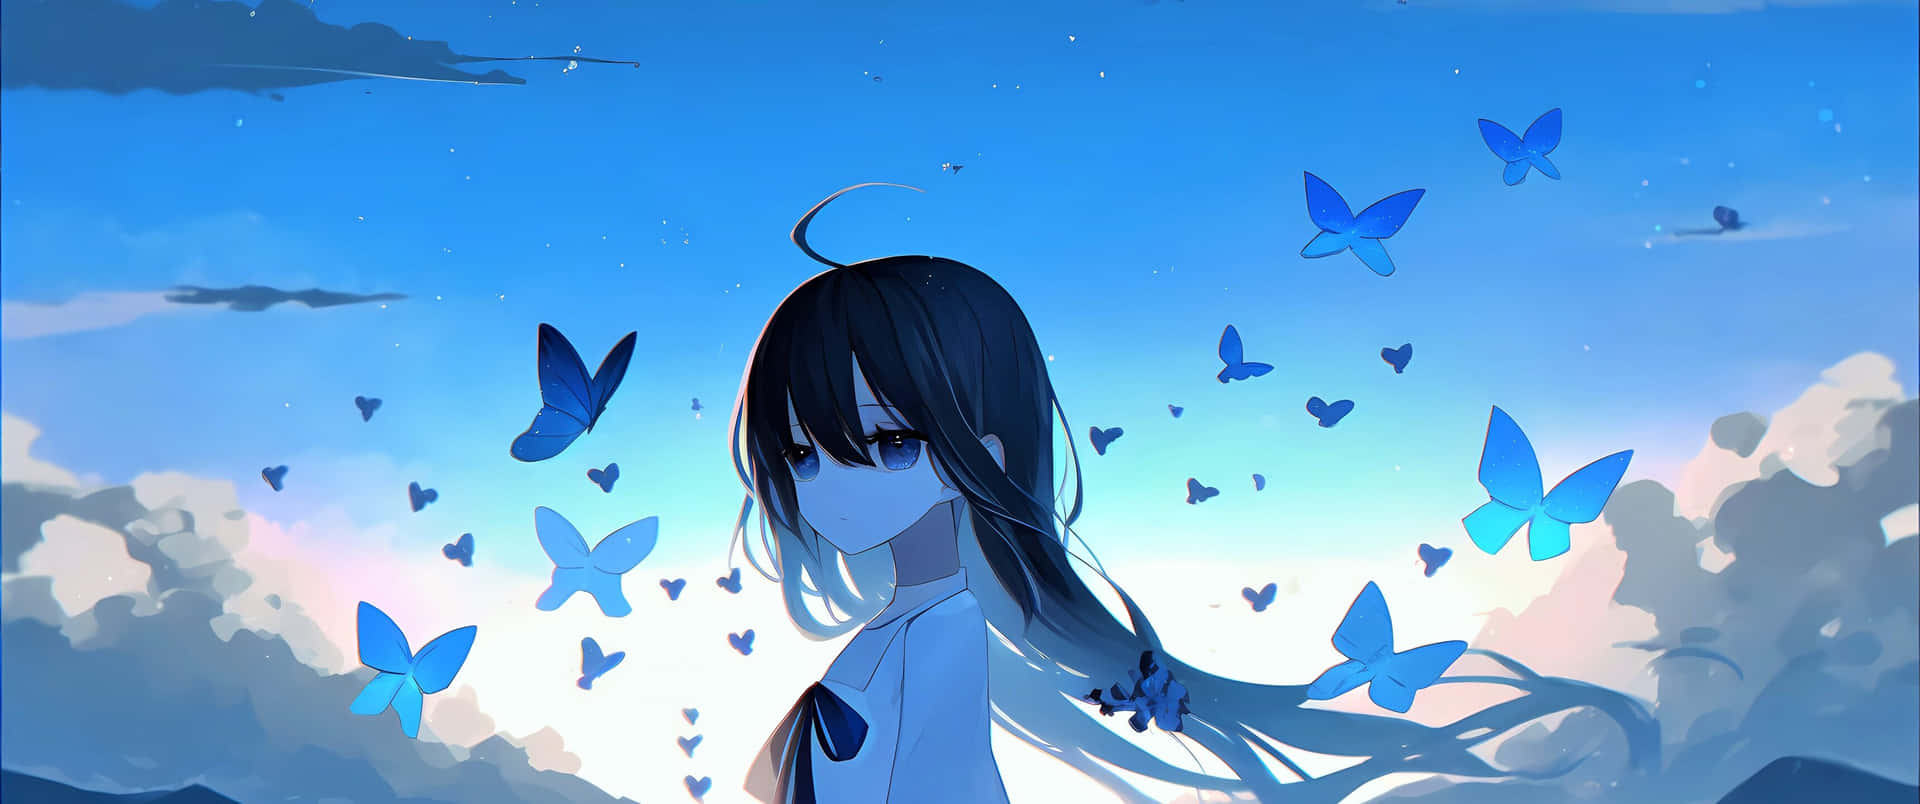 Solitary Anime Girl With Butterflies Wallpaper